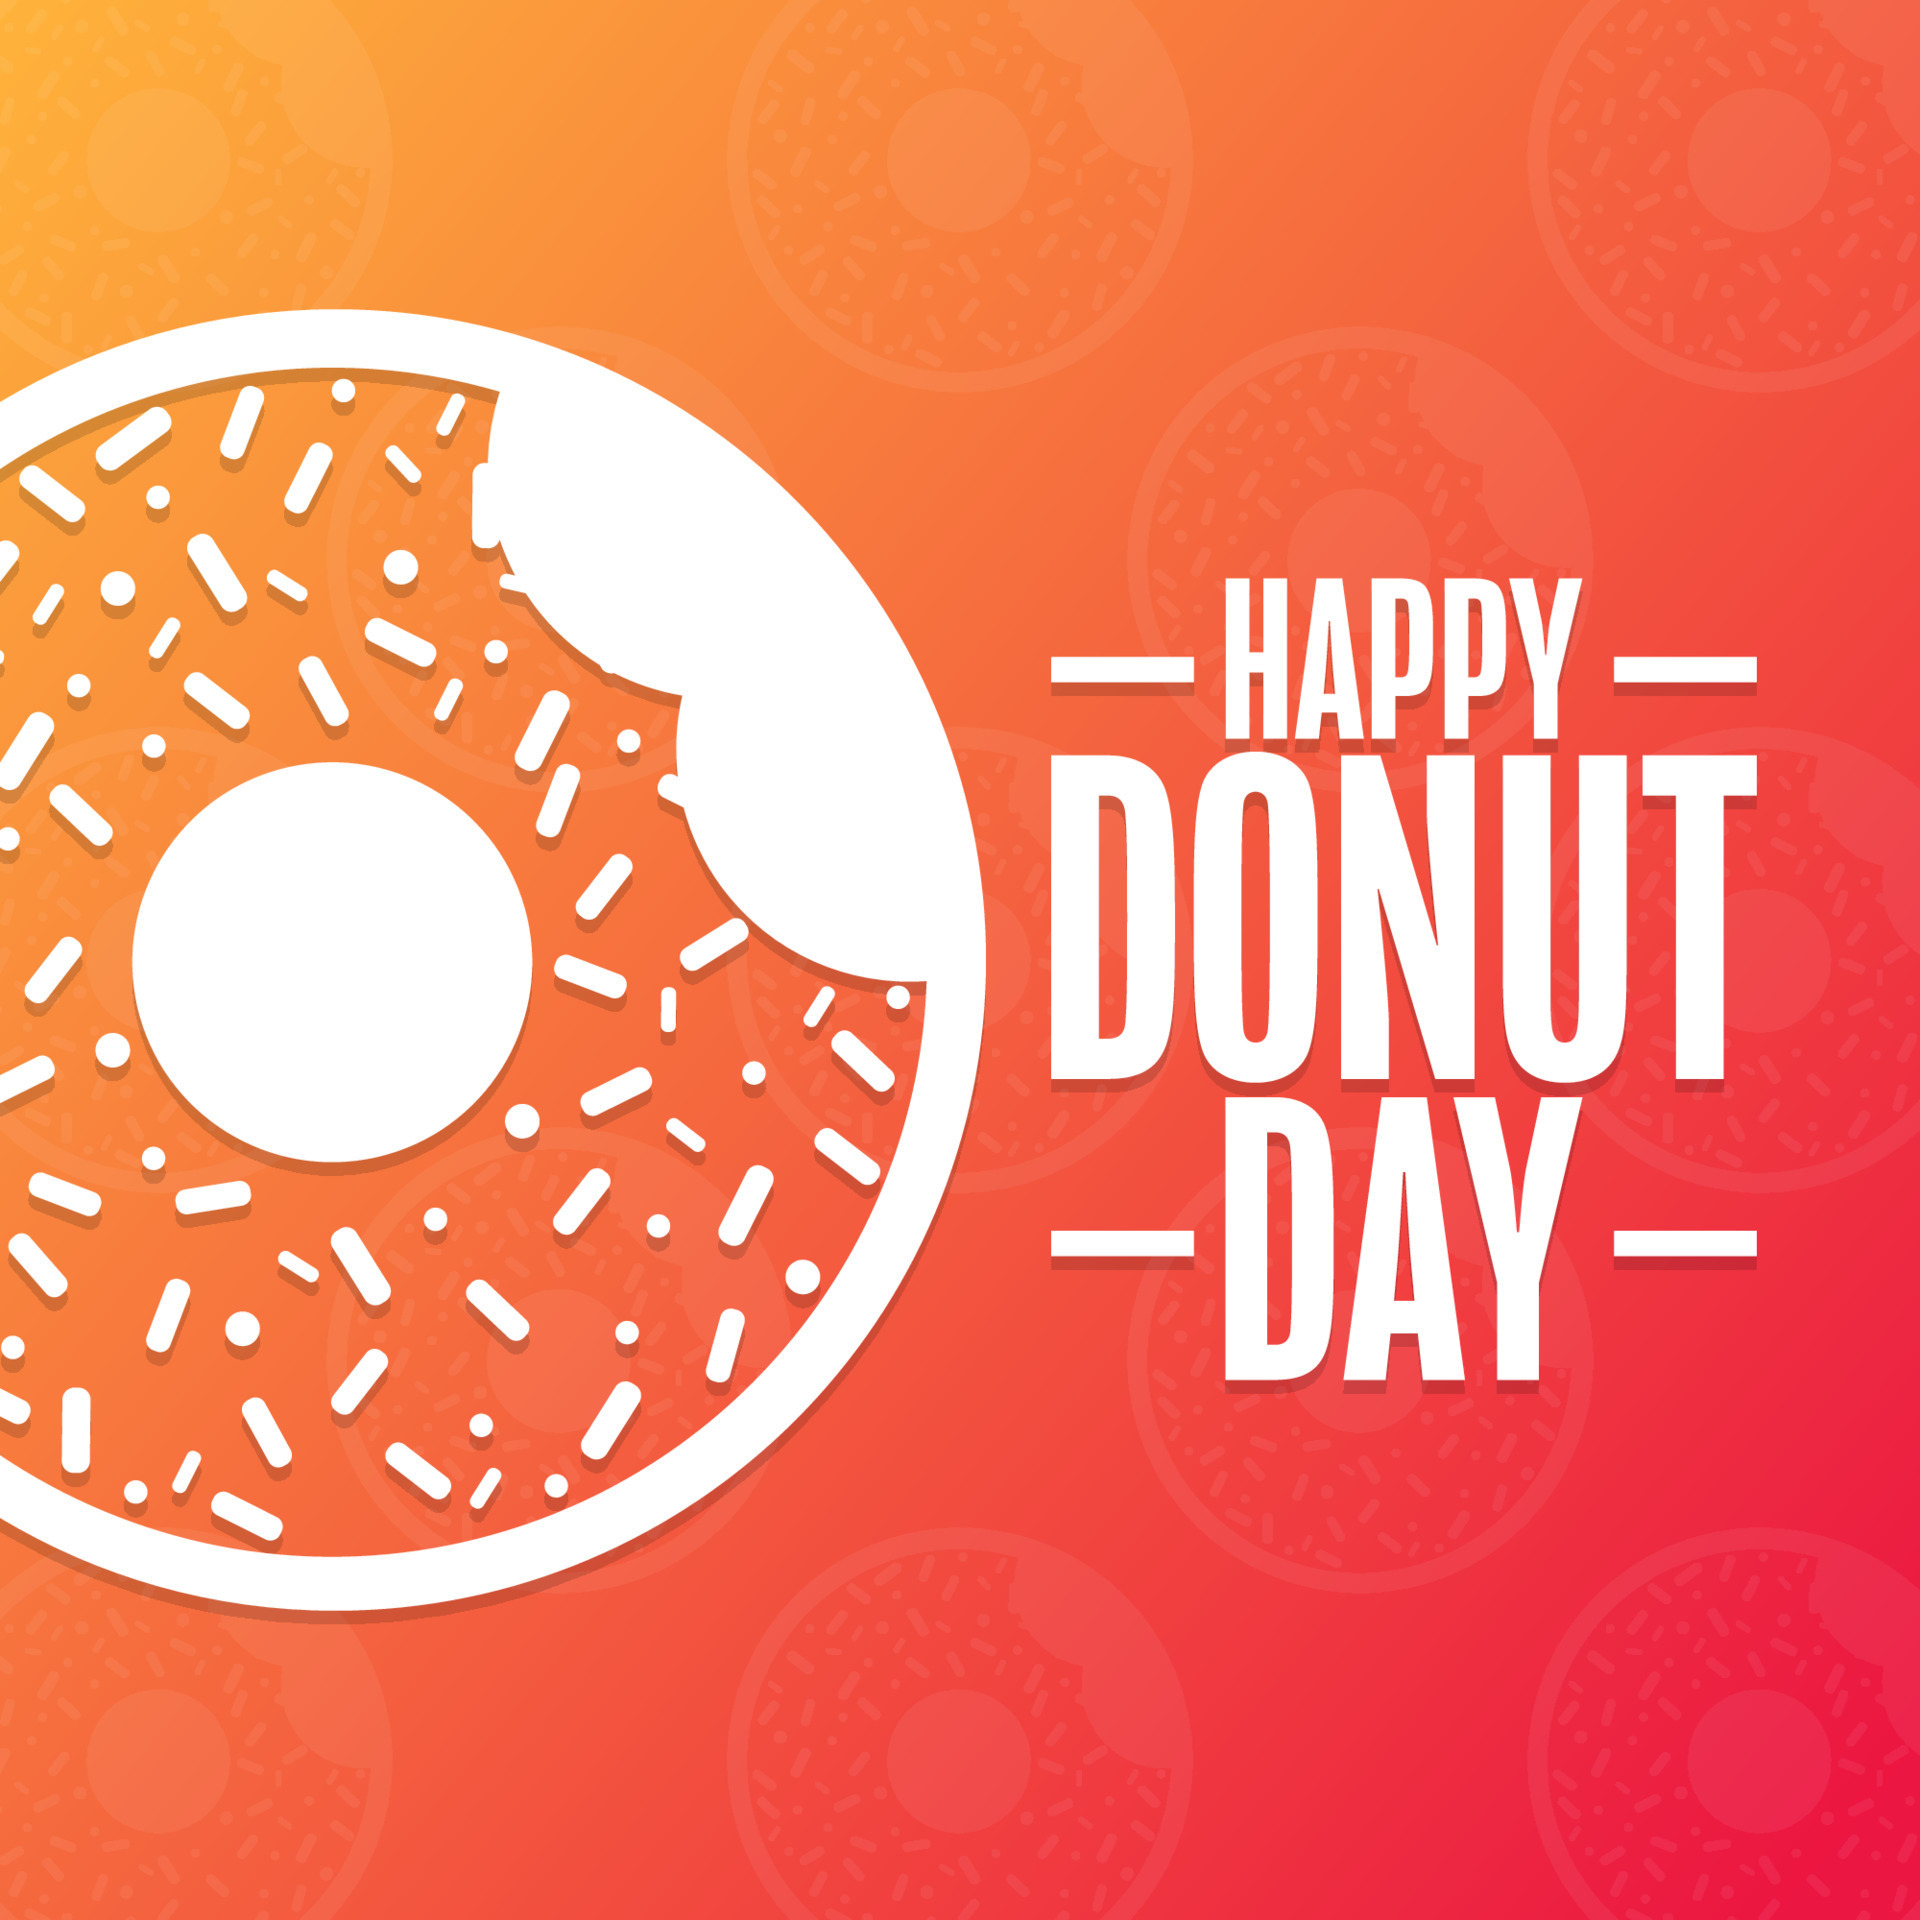 Happy Donut Day. Holiday concept. Template for background, banner, card